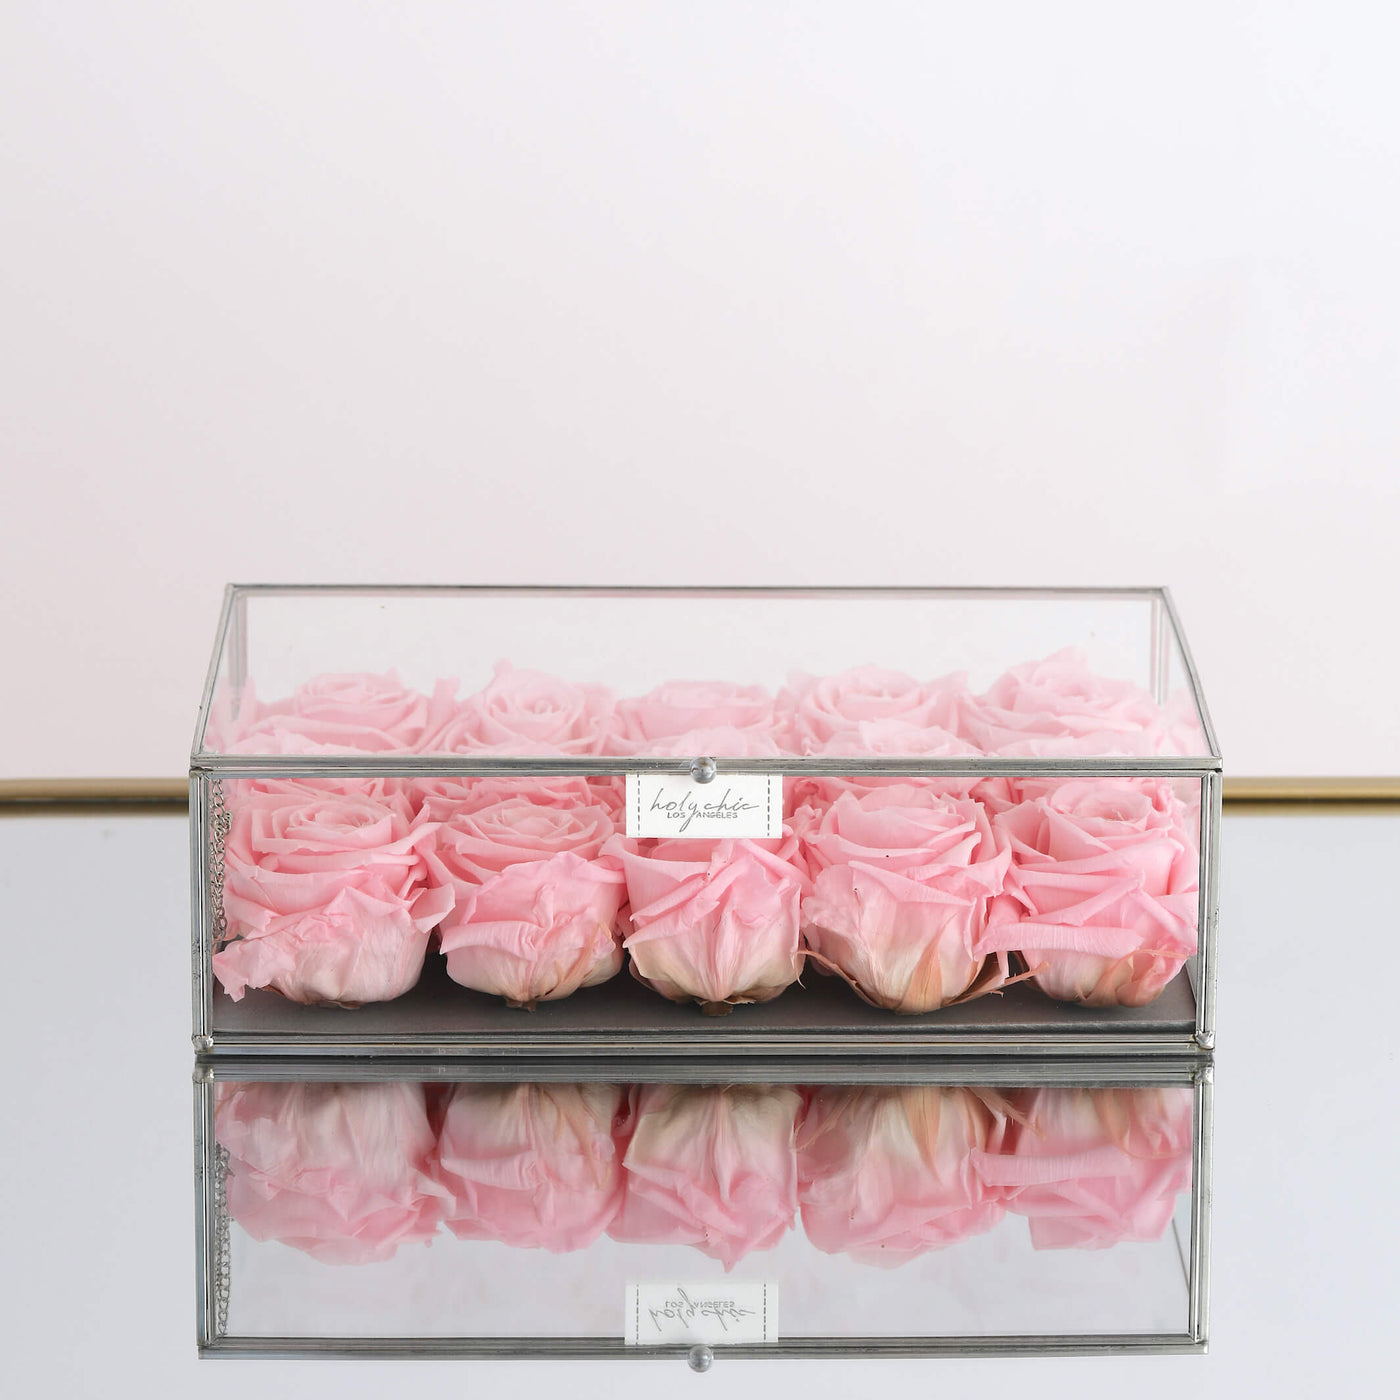 Forever roses arranged in a rectangular clear glass box 